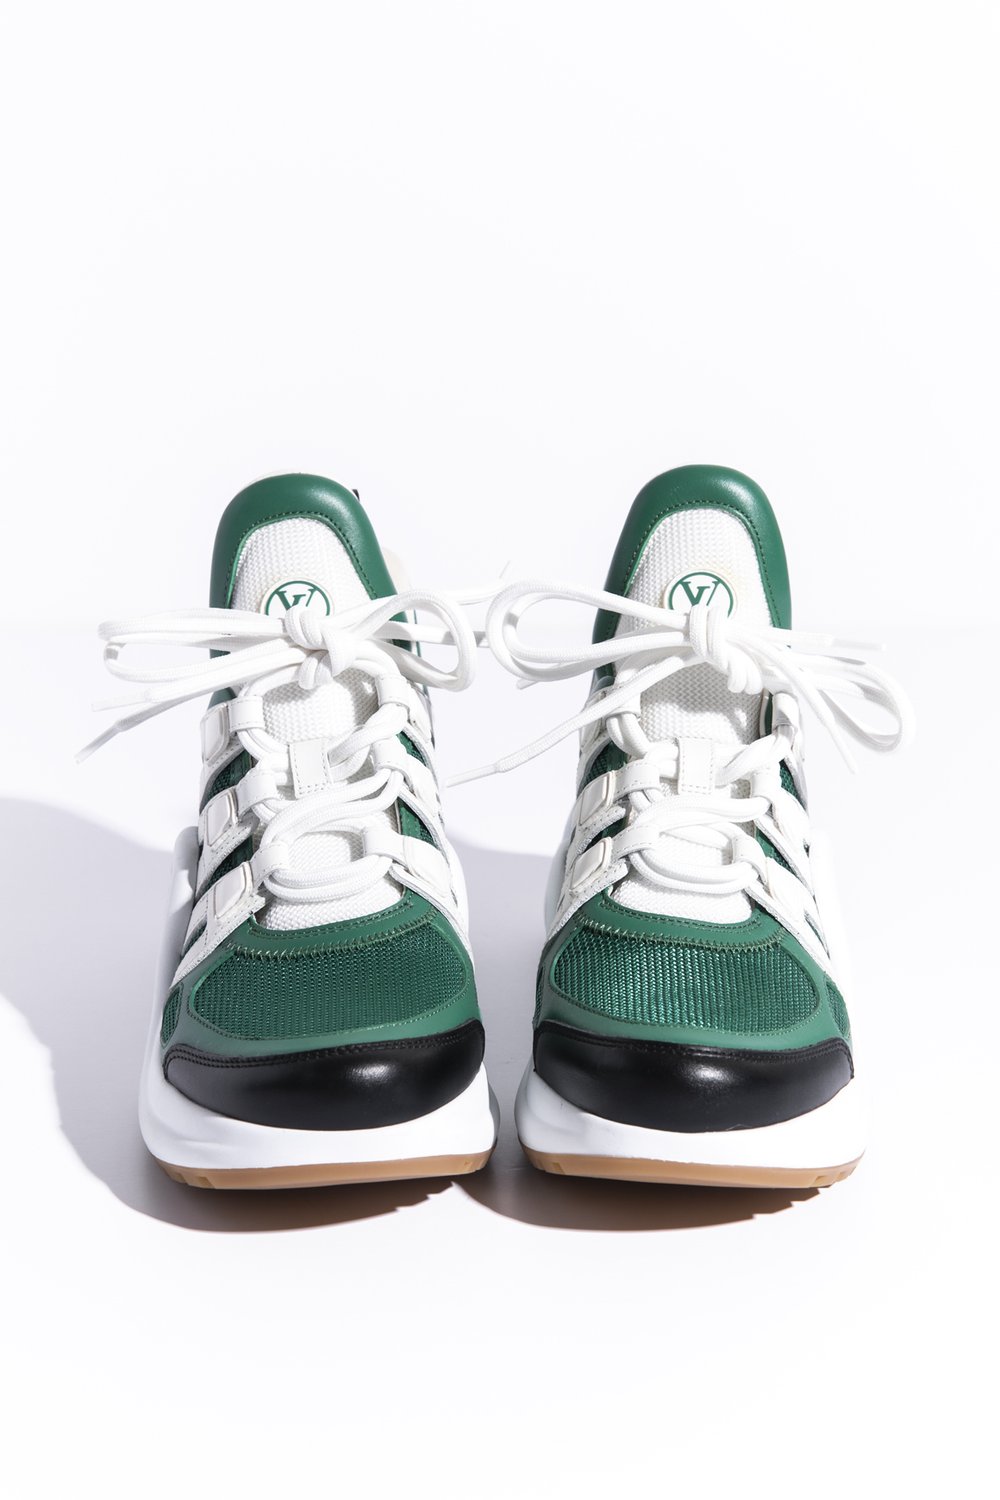 Louis Vuitton green Archlight Sneakers